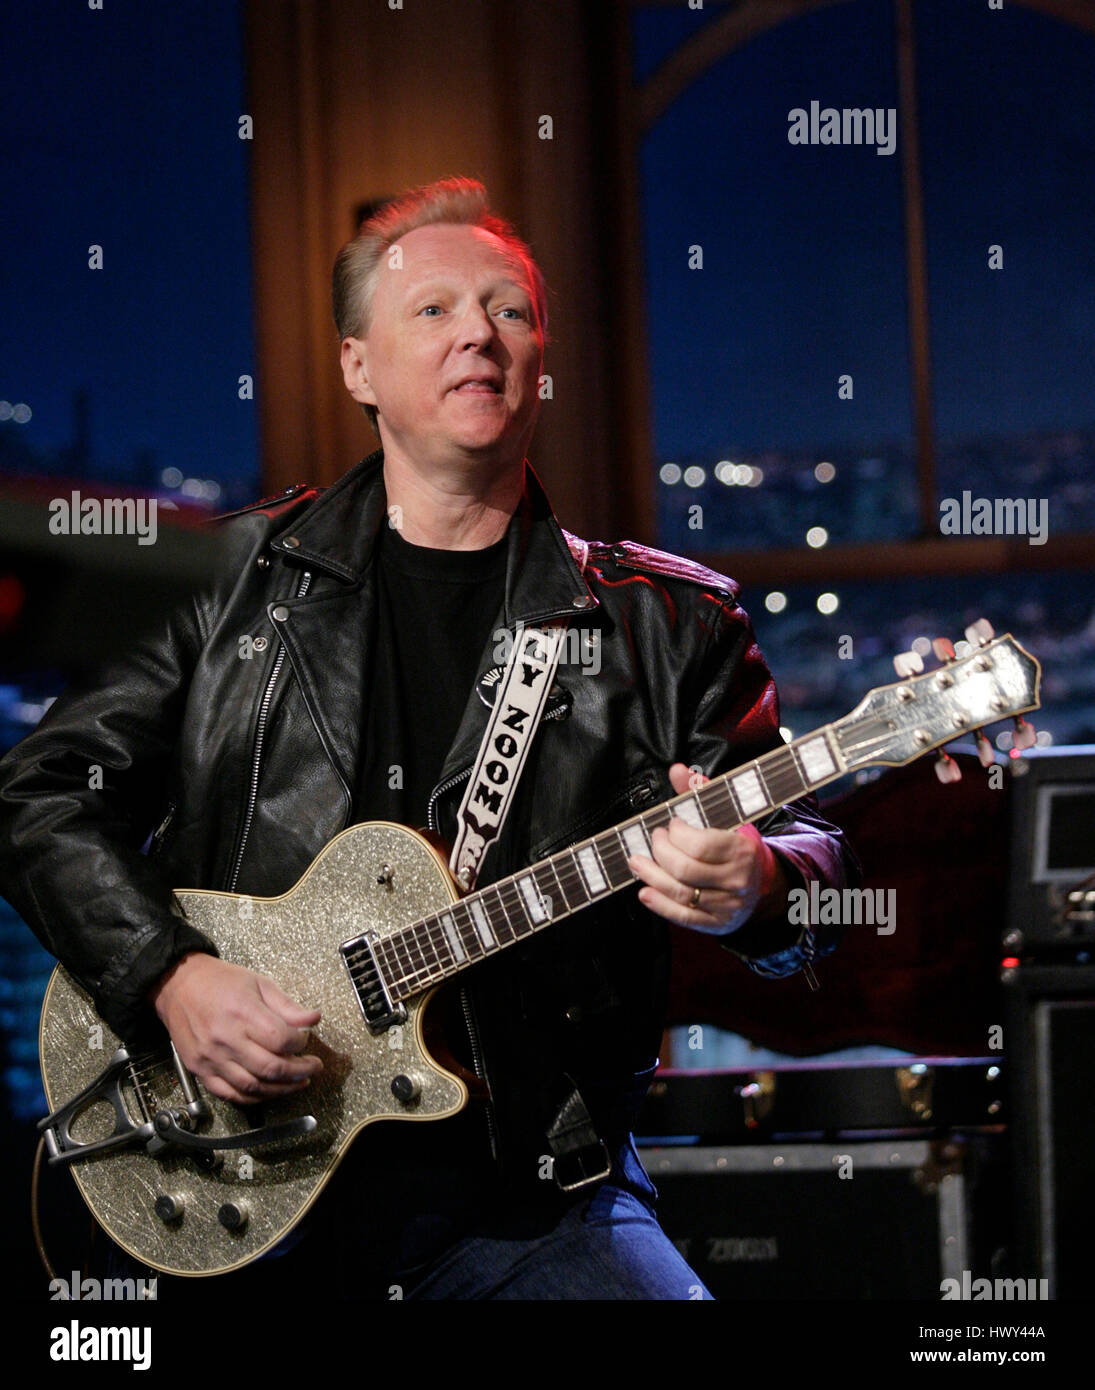 The punk band, "X", Billy Zoom on guitar, perform during a segment of 'The  Late Late Show with Craig Ferguson' at CBS Television City on Oct. 27, 2008  in Los Angeles, California.